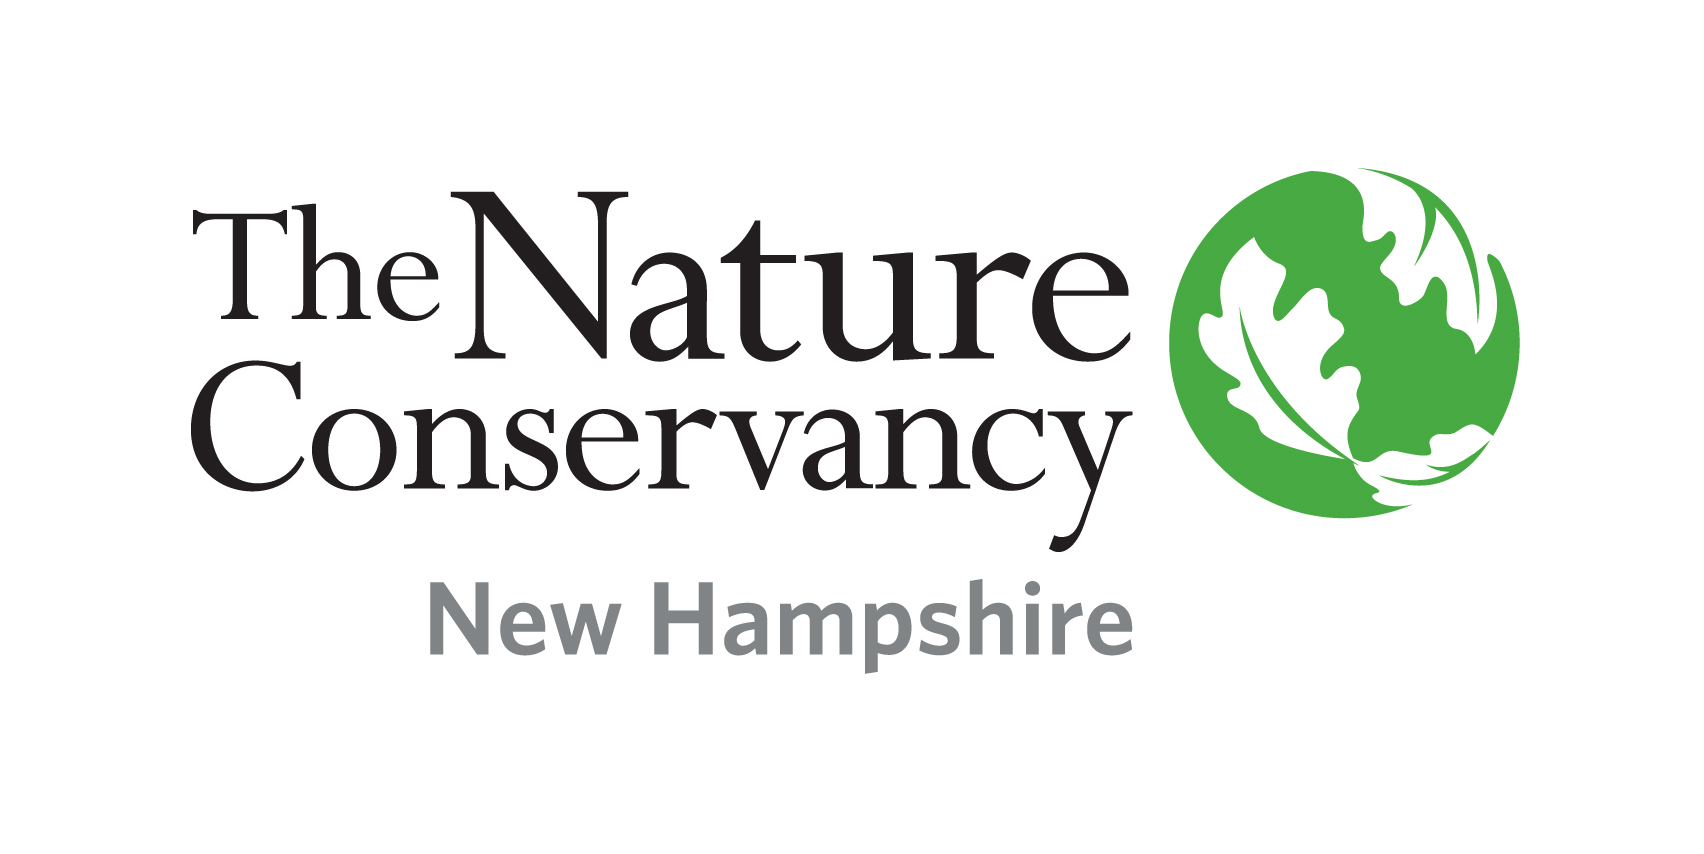 The Nature Conservancy New Hampshire